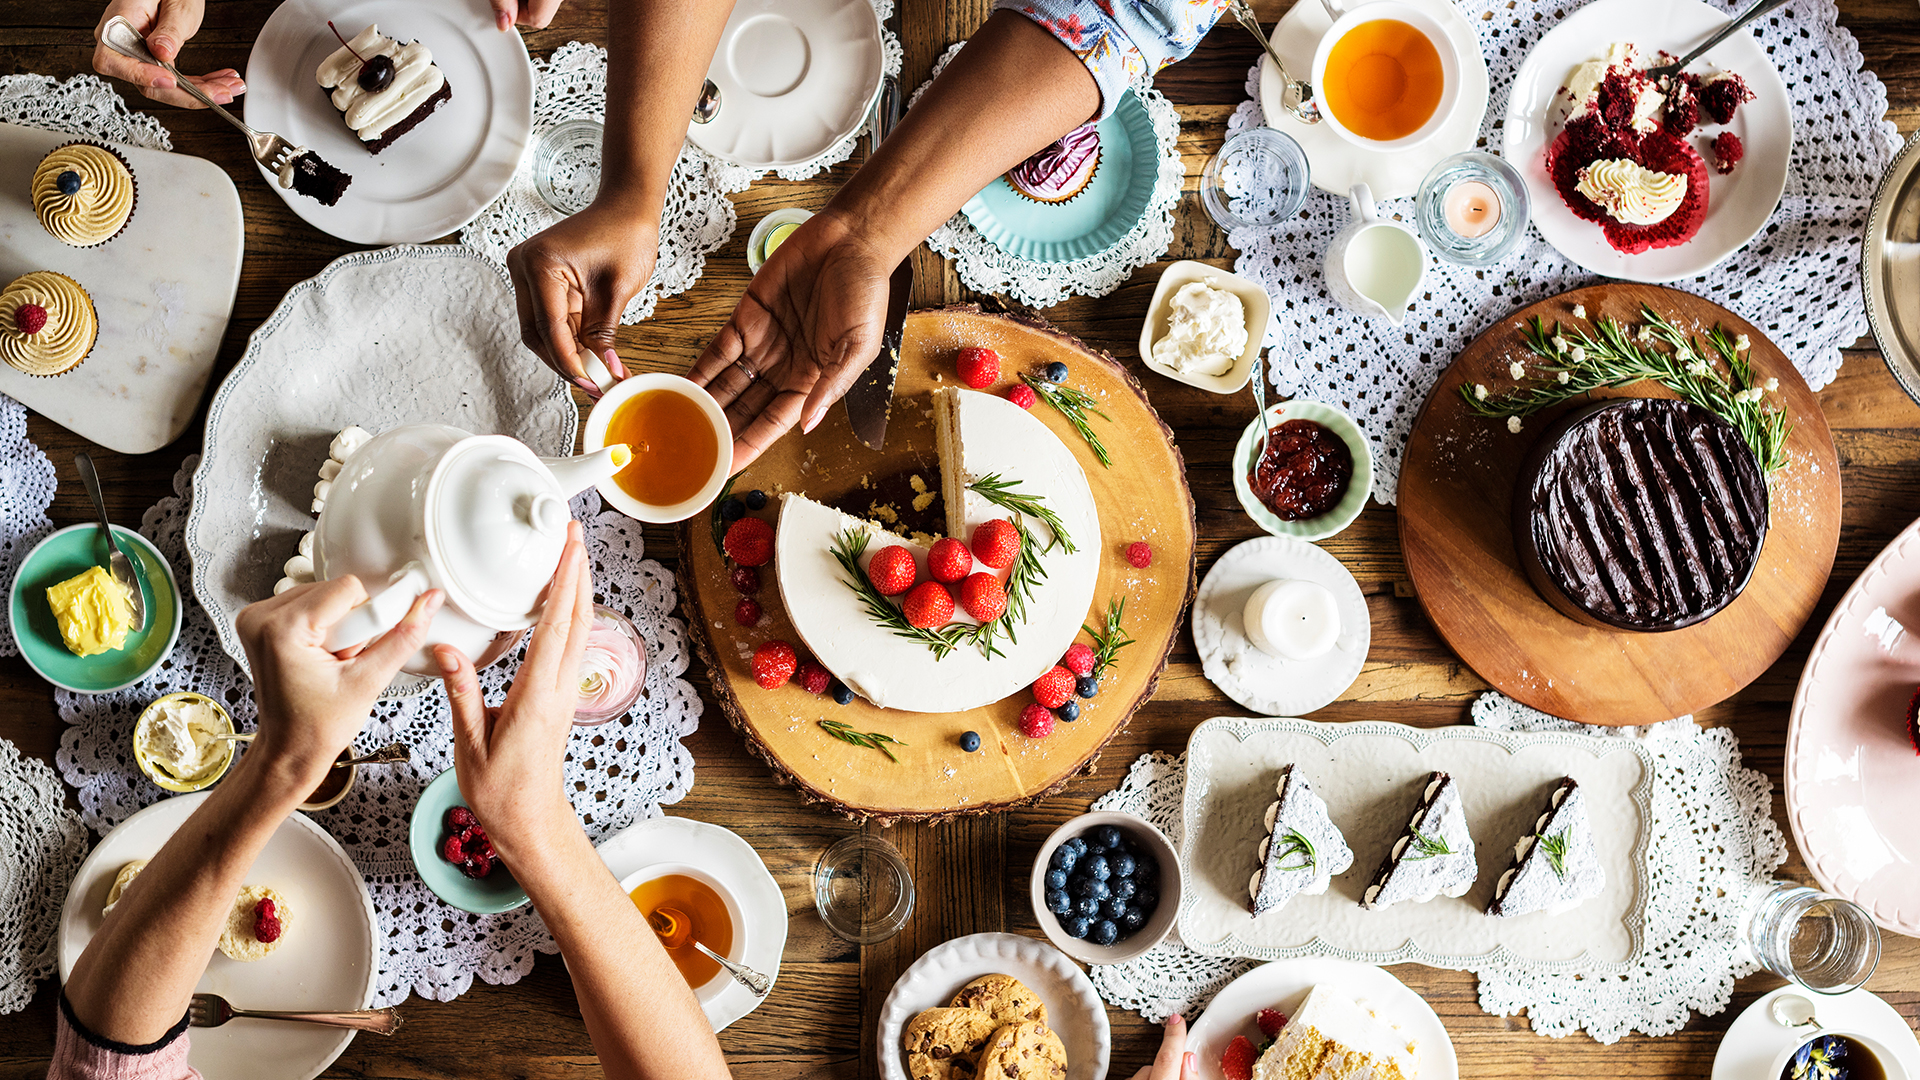 Top tips for hosting your own coffee morning at home.